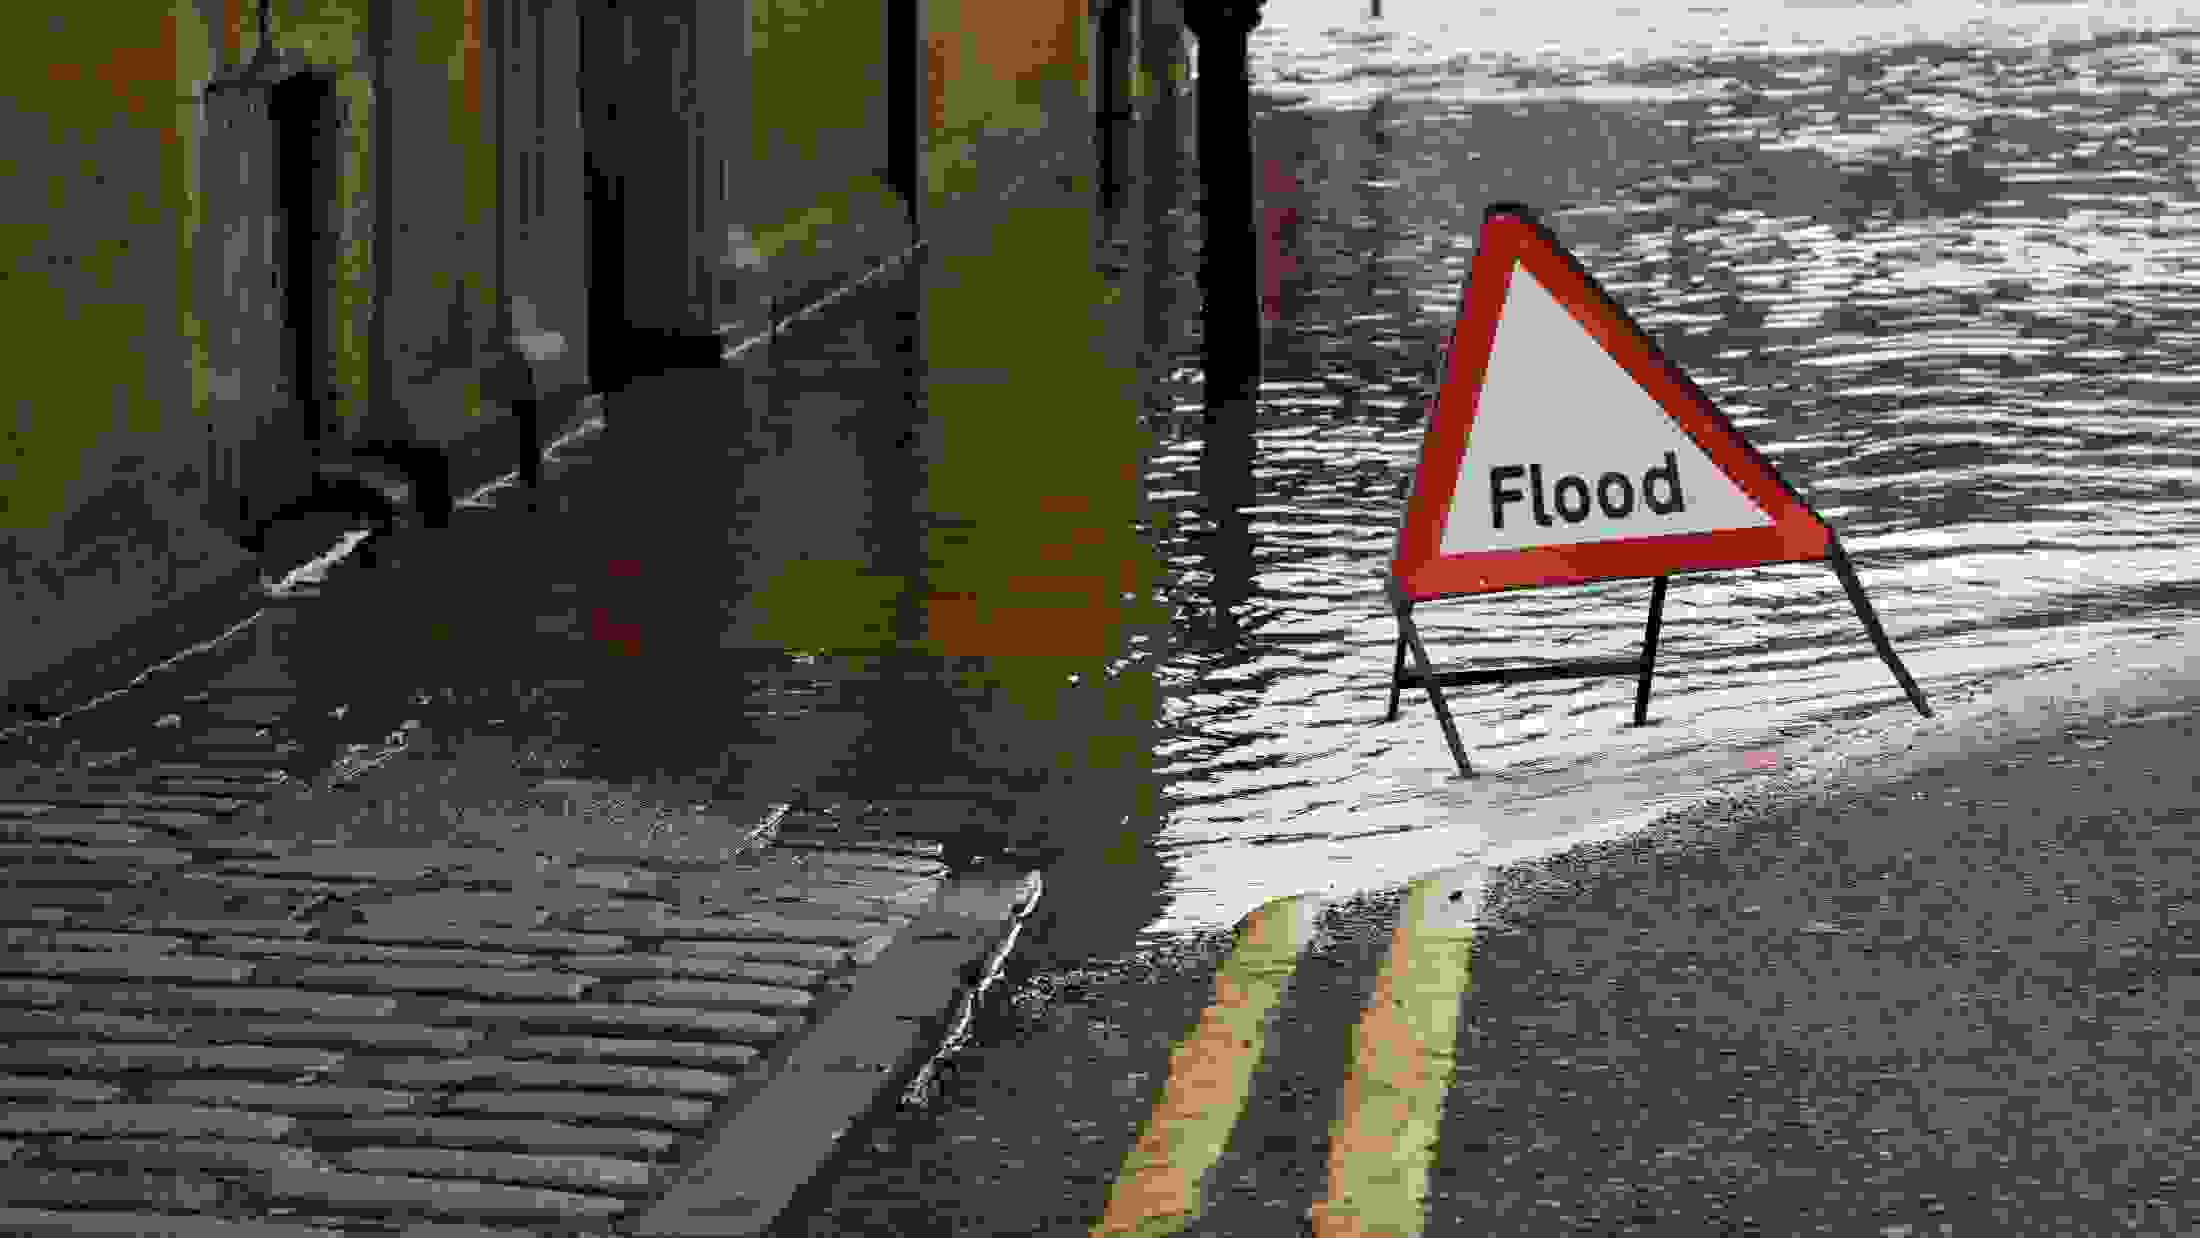 Flood warning sign in a flooded city street